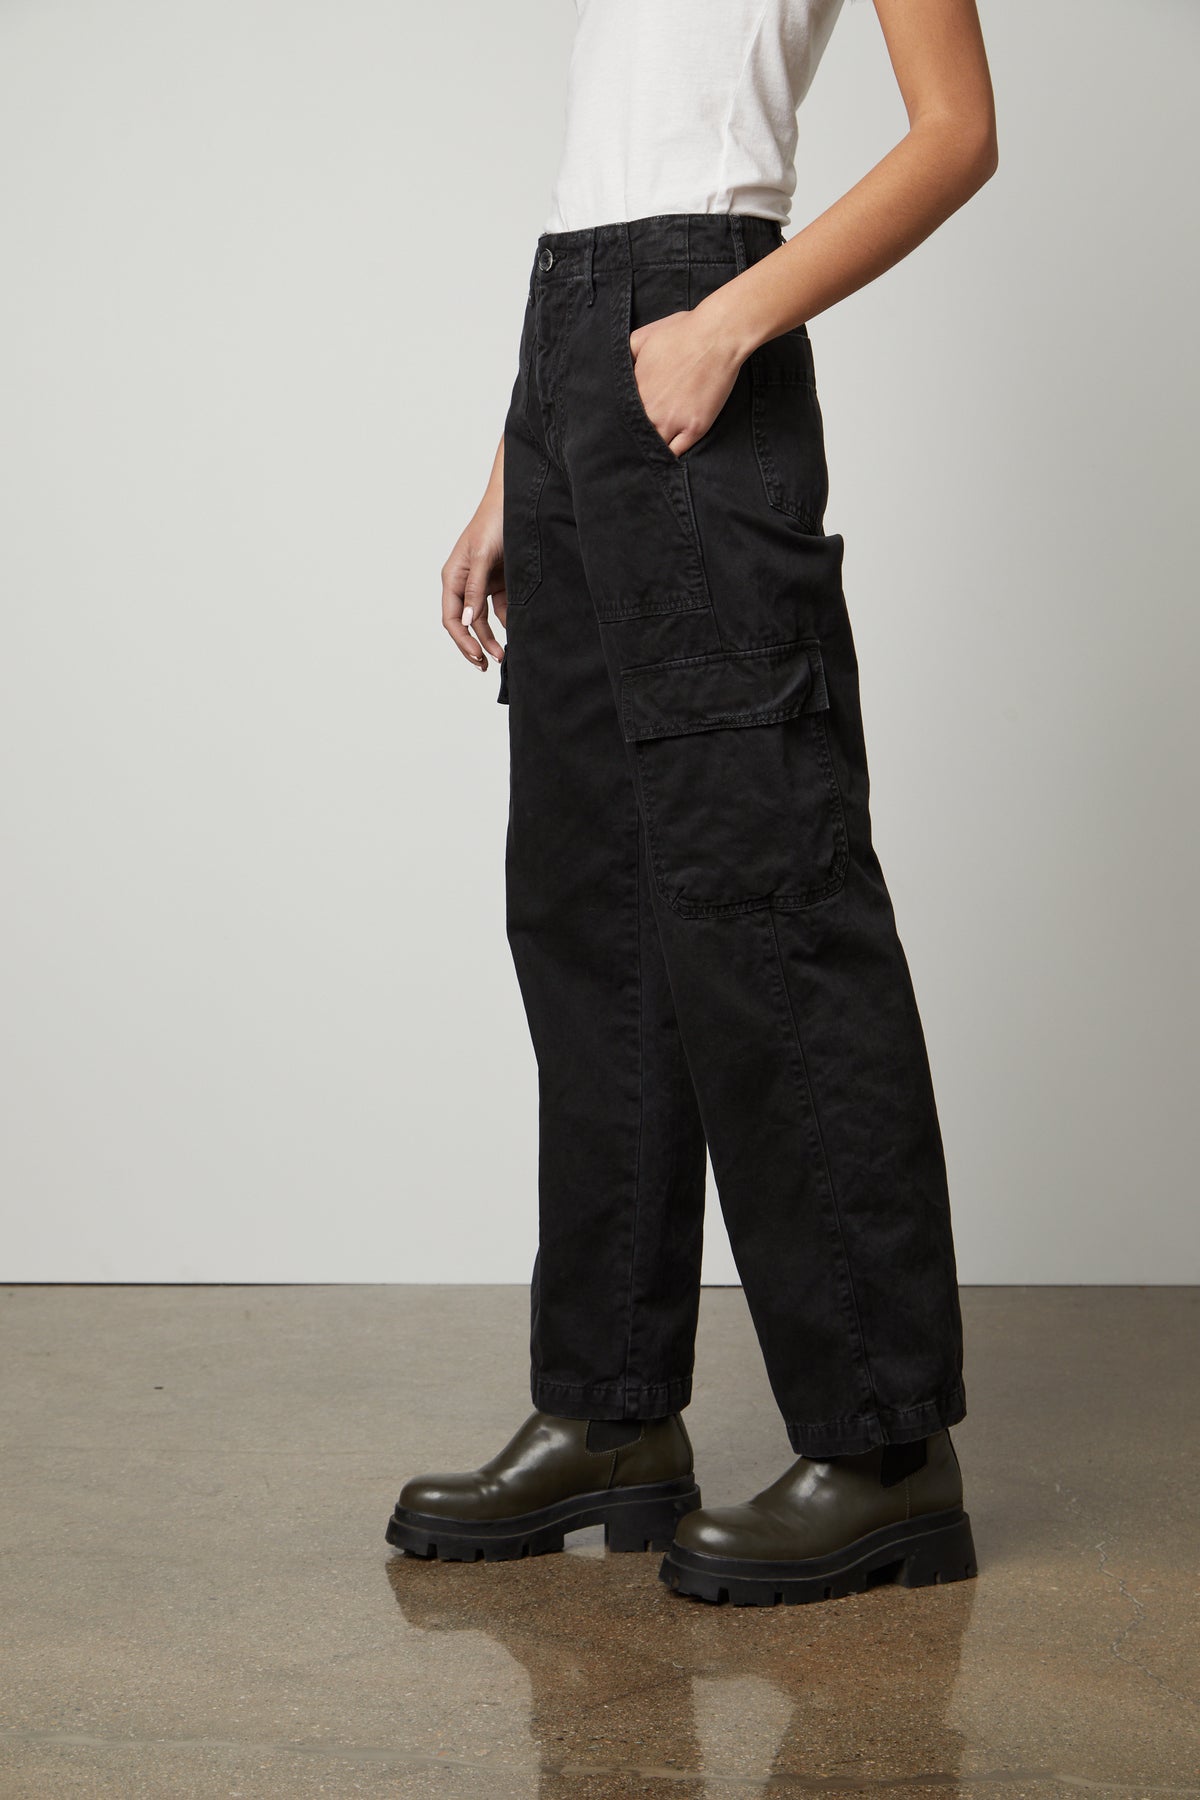 A woman wearing Velvet by Graham & Spencer MAKAYLA SANDED TWILL CARGO PANTS with pockets for added functionality and a white t-shirt.-26914867773633